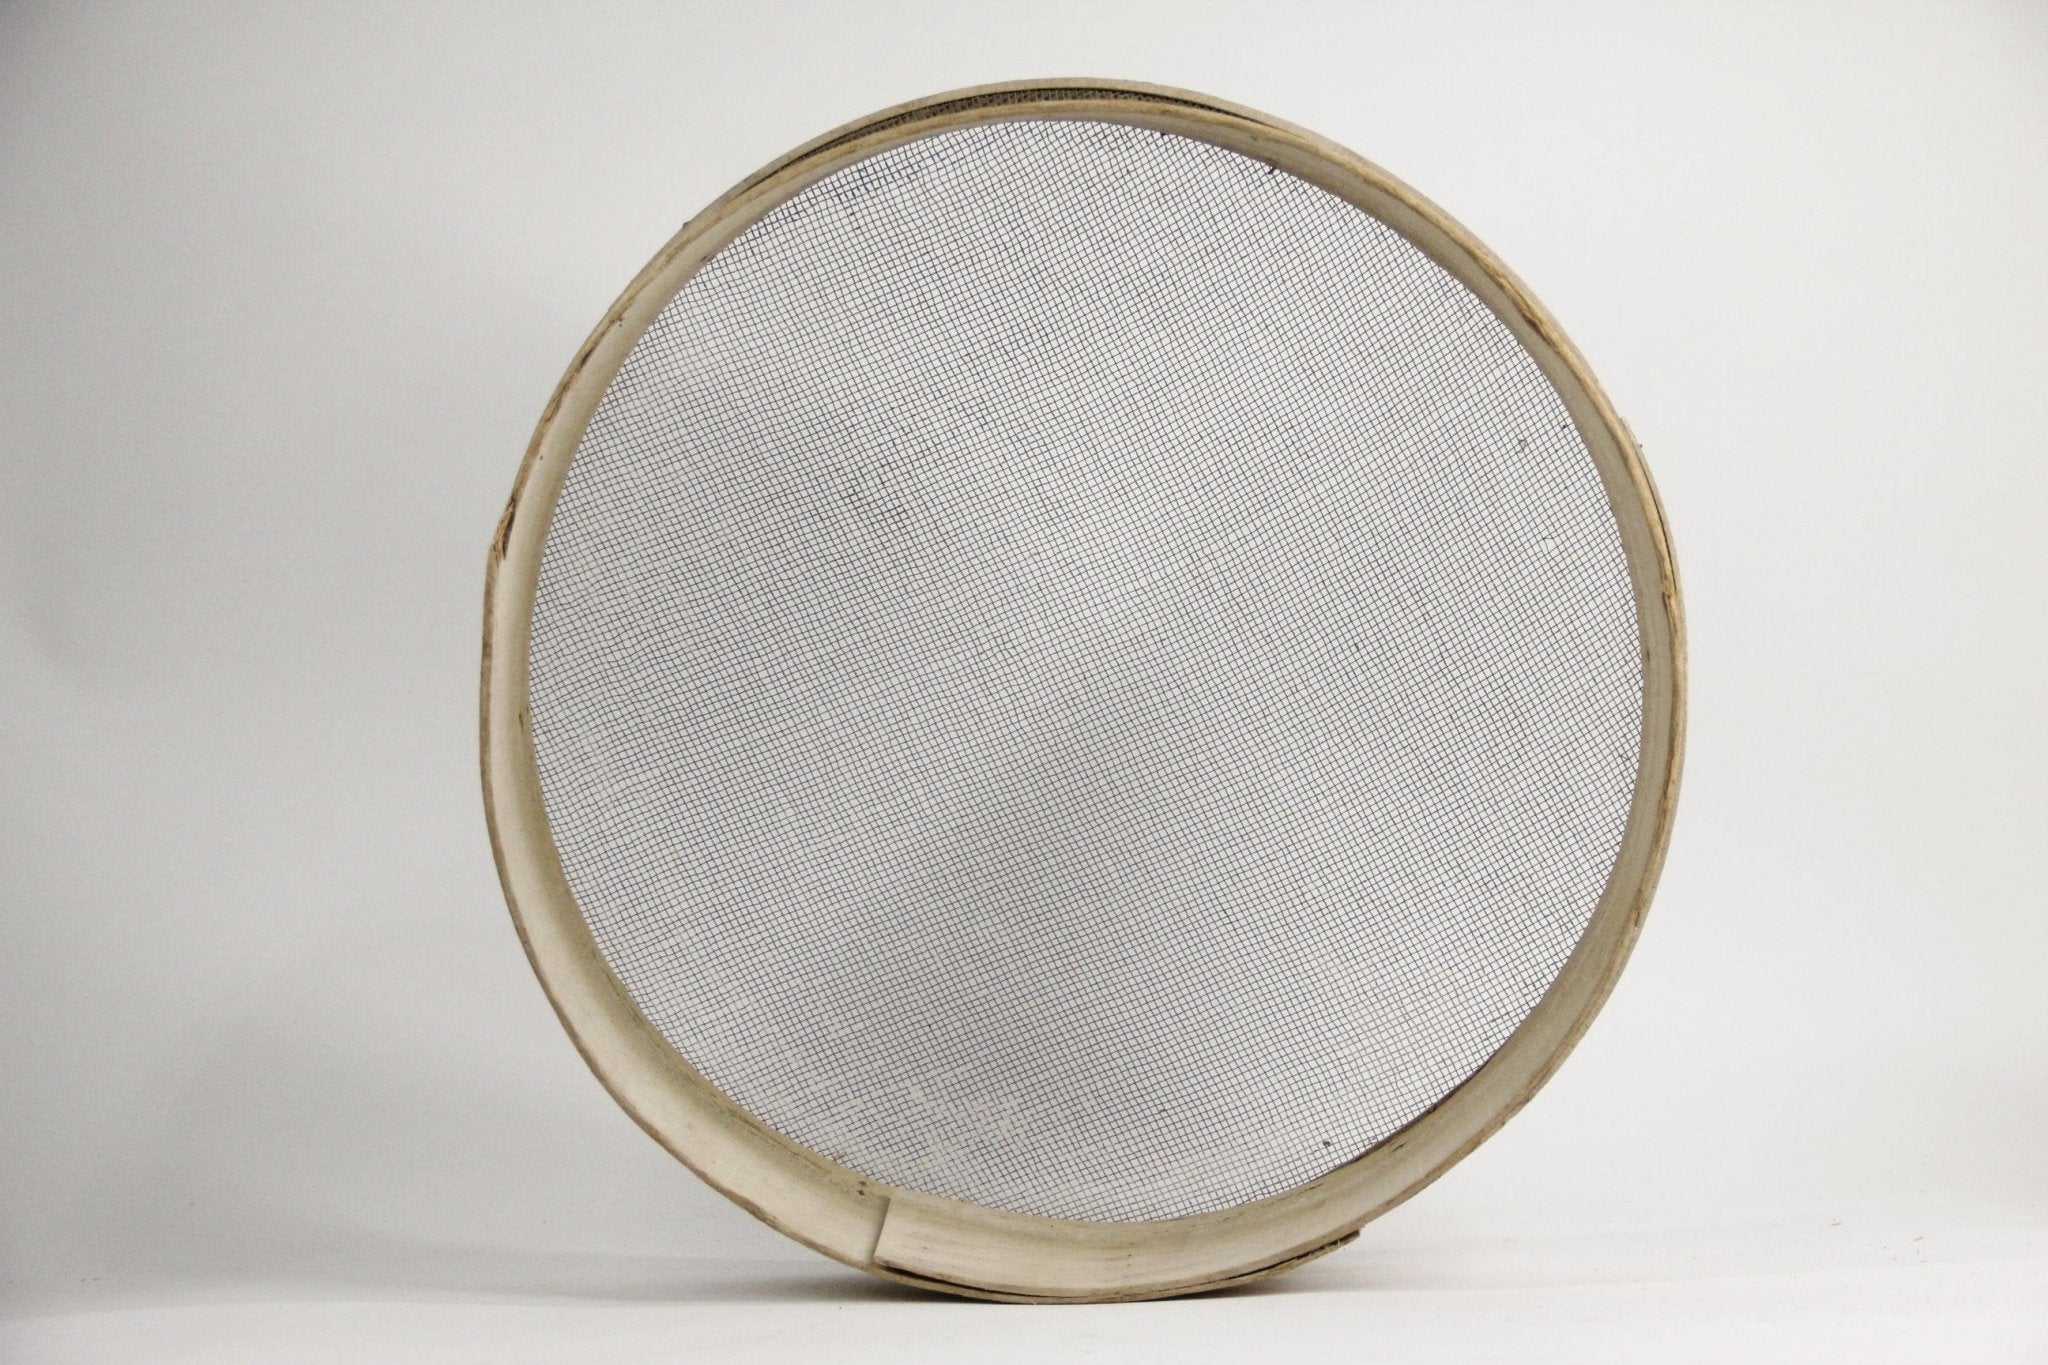 Vintage French Bentwood Sieve| Wire Mesh Flour Sifter - Debra Hall Lifestyle